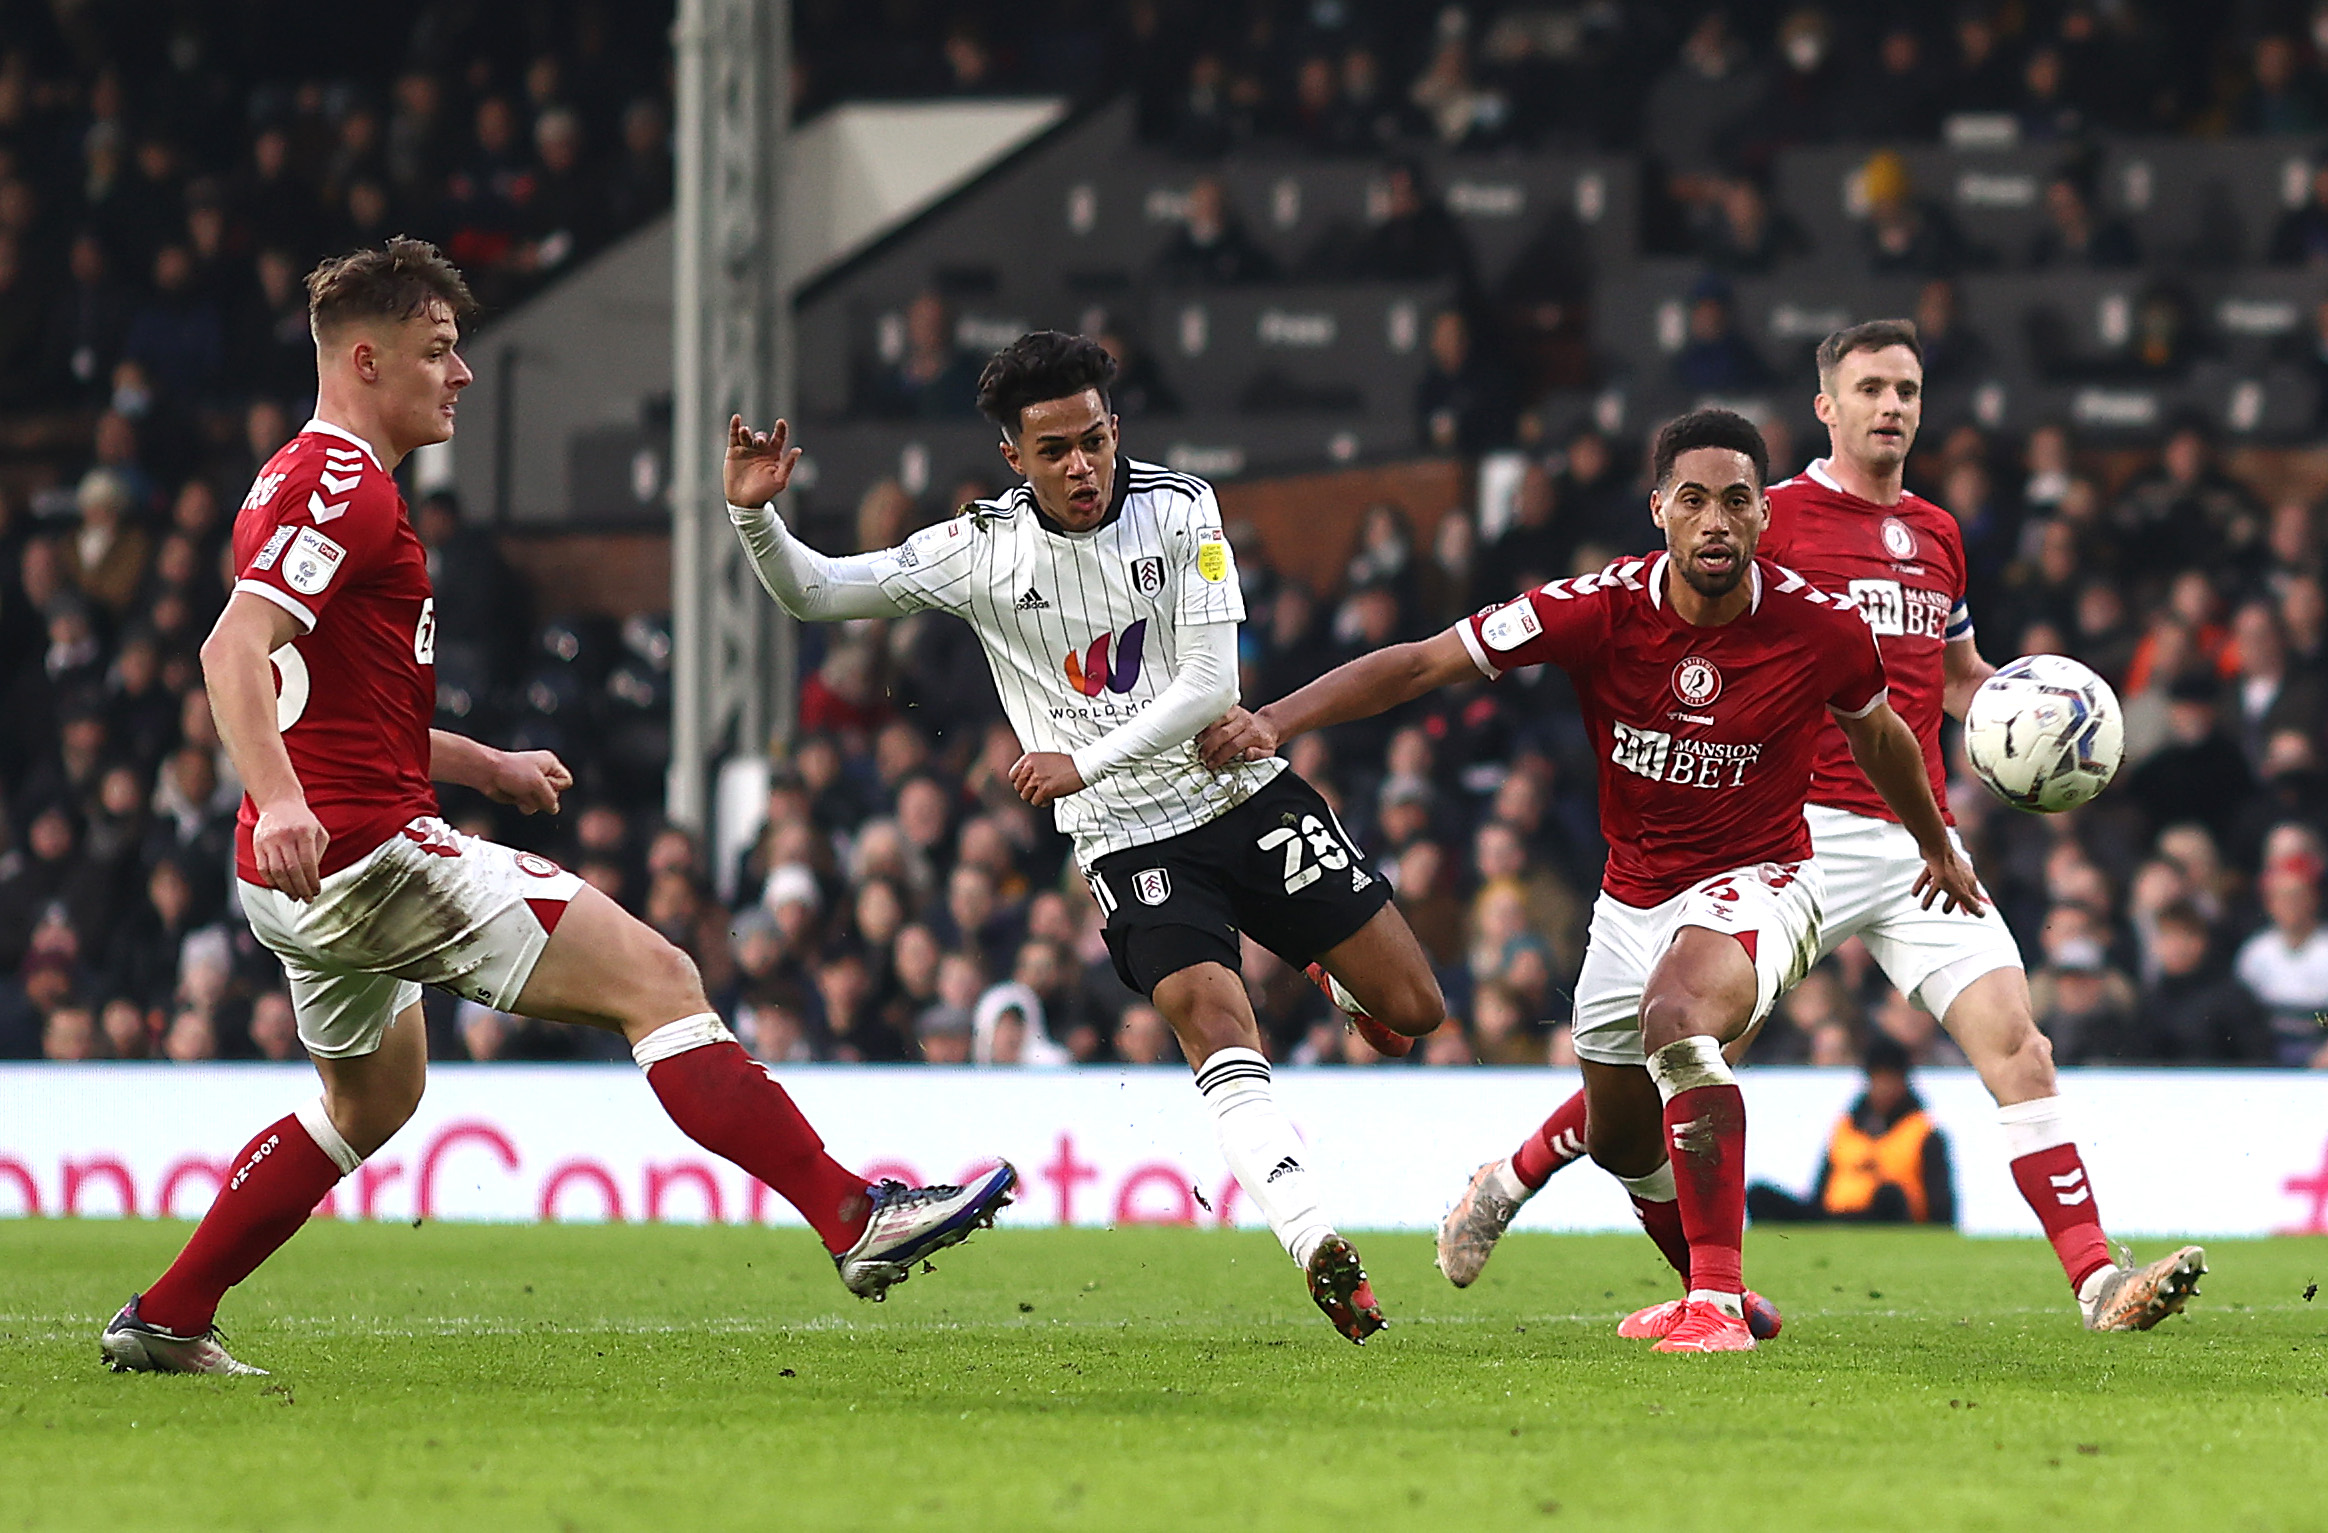 Fabio Carvalho of Fulham in action. (Photo by Ryan Pierse/Getty Images)